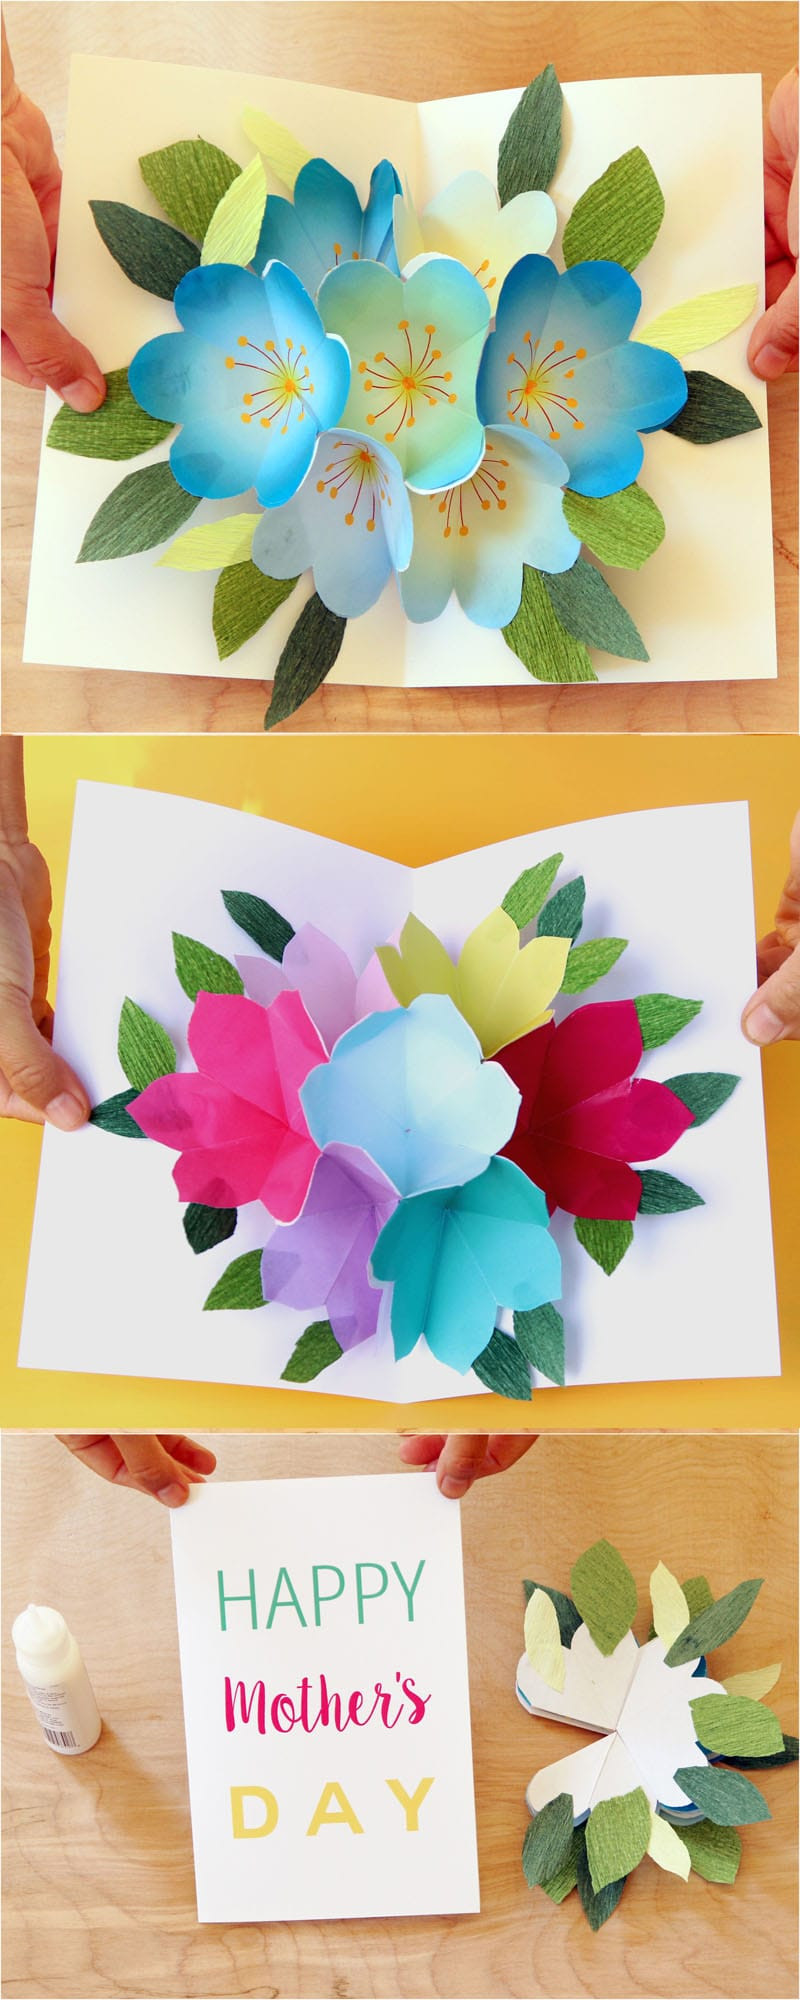 Mothers Day Card Ideas To Make
 Pop Up Flowers DIY Printable Mother s Day Card A Piece